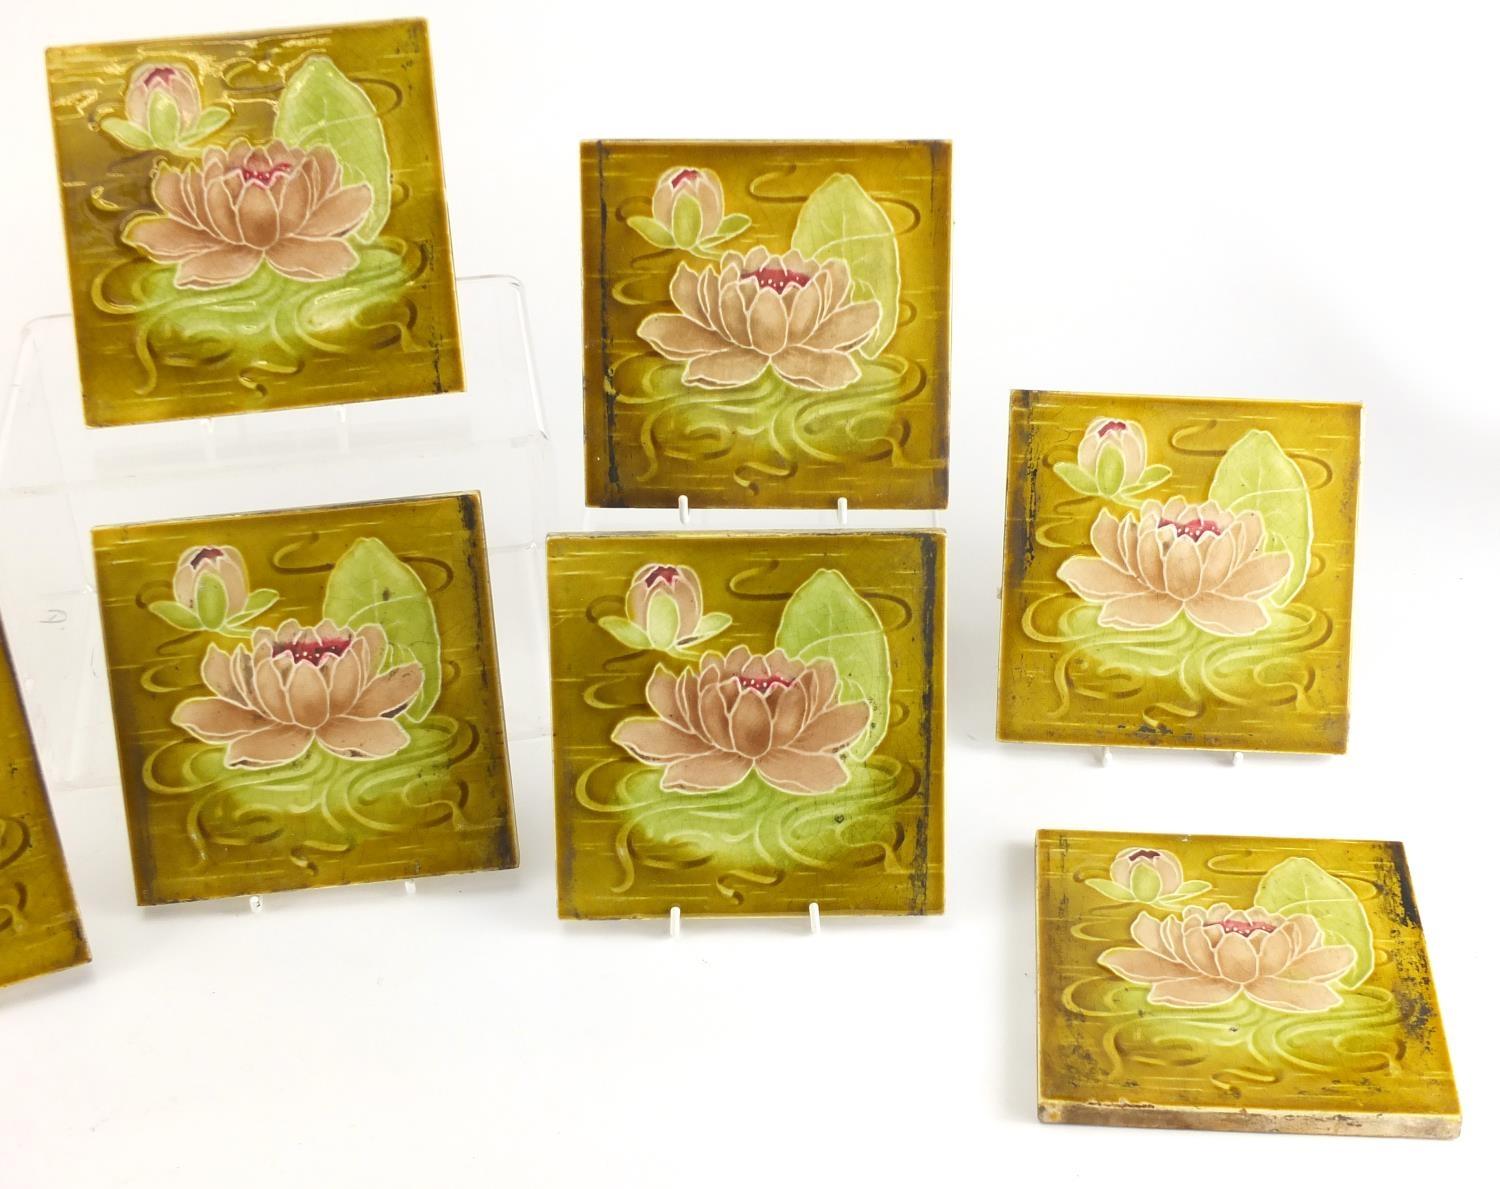 Ten Art Nouveau Maiolica tiles by Alfred Meakin, each hand painted with lily's, each 15.5cm x 15.5cm - Image 3 of 4